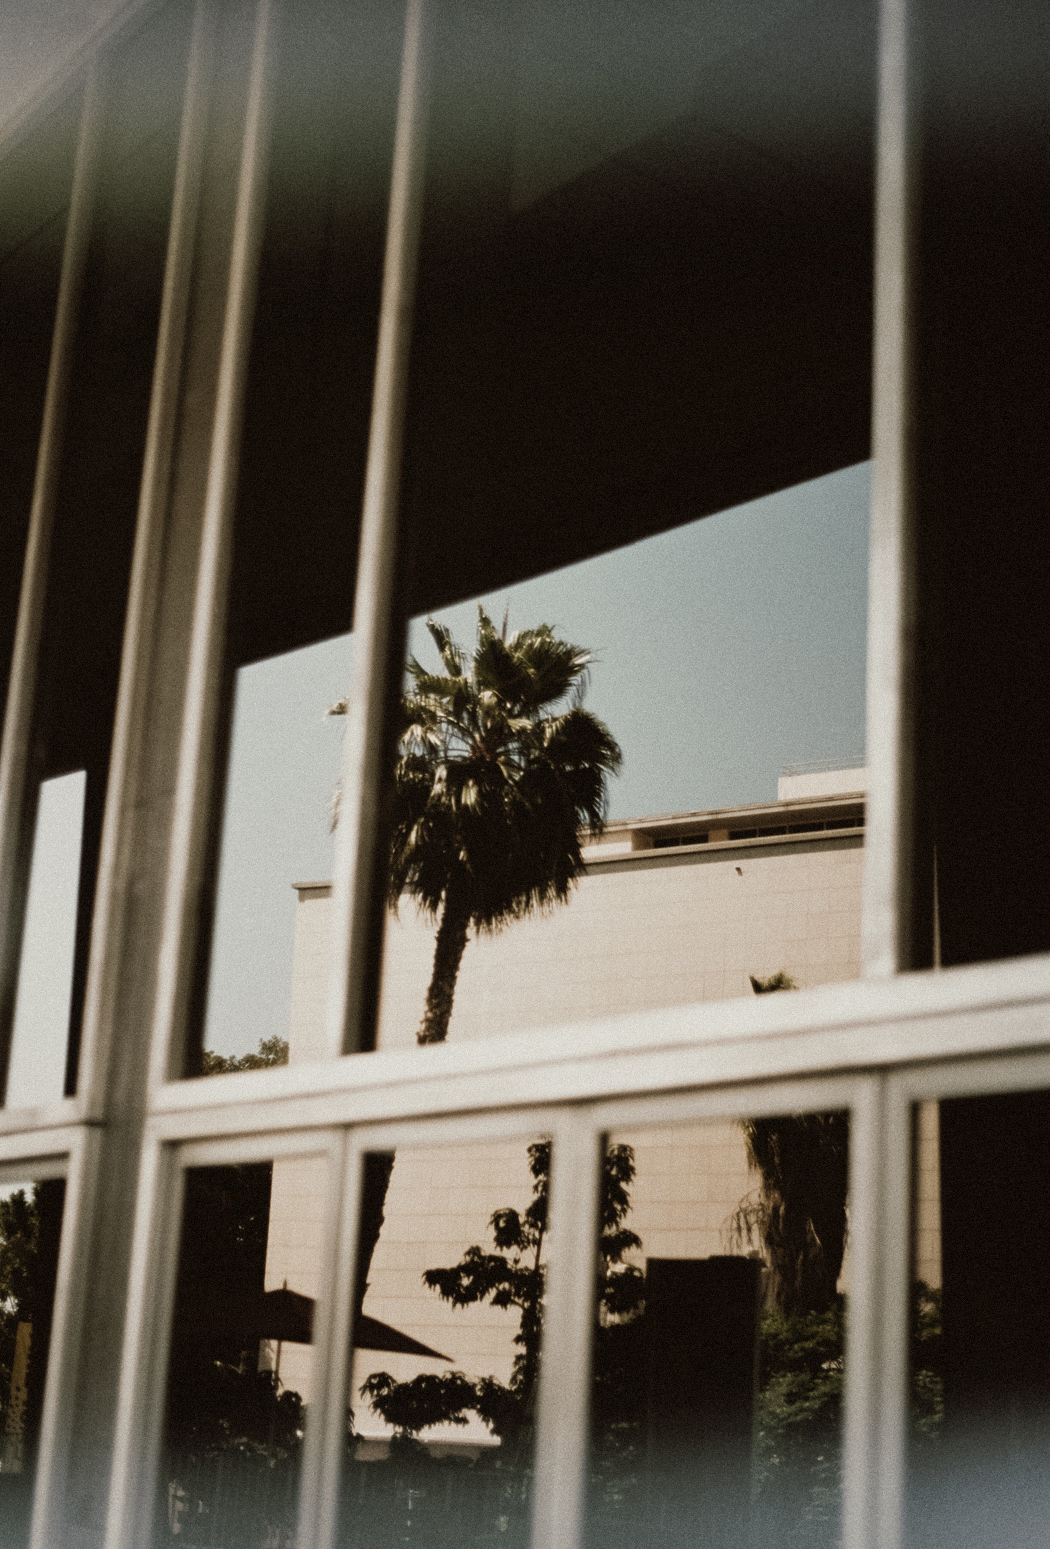 Los Angeles On Film. Shot by Fiona Dinkelbach